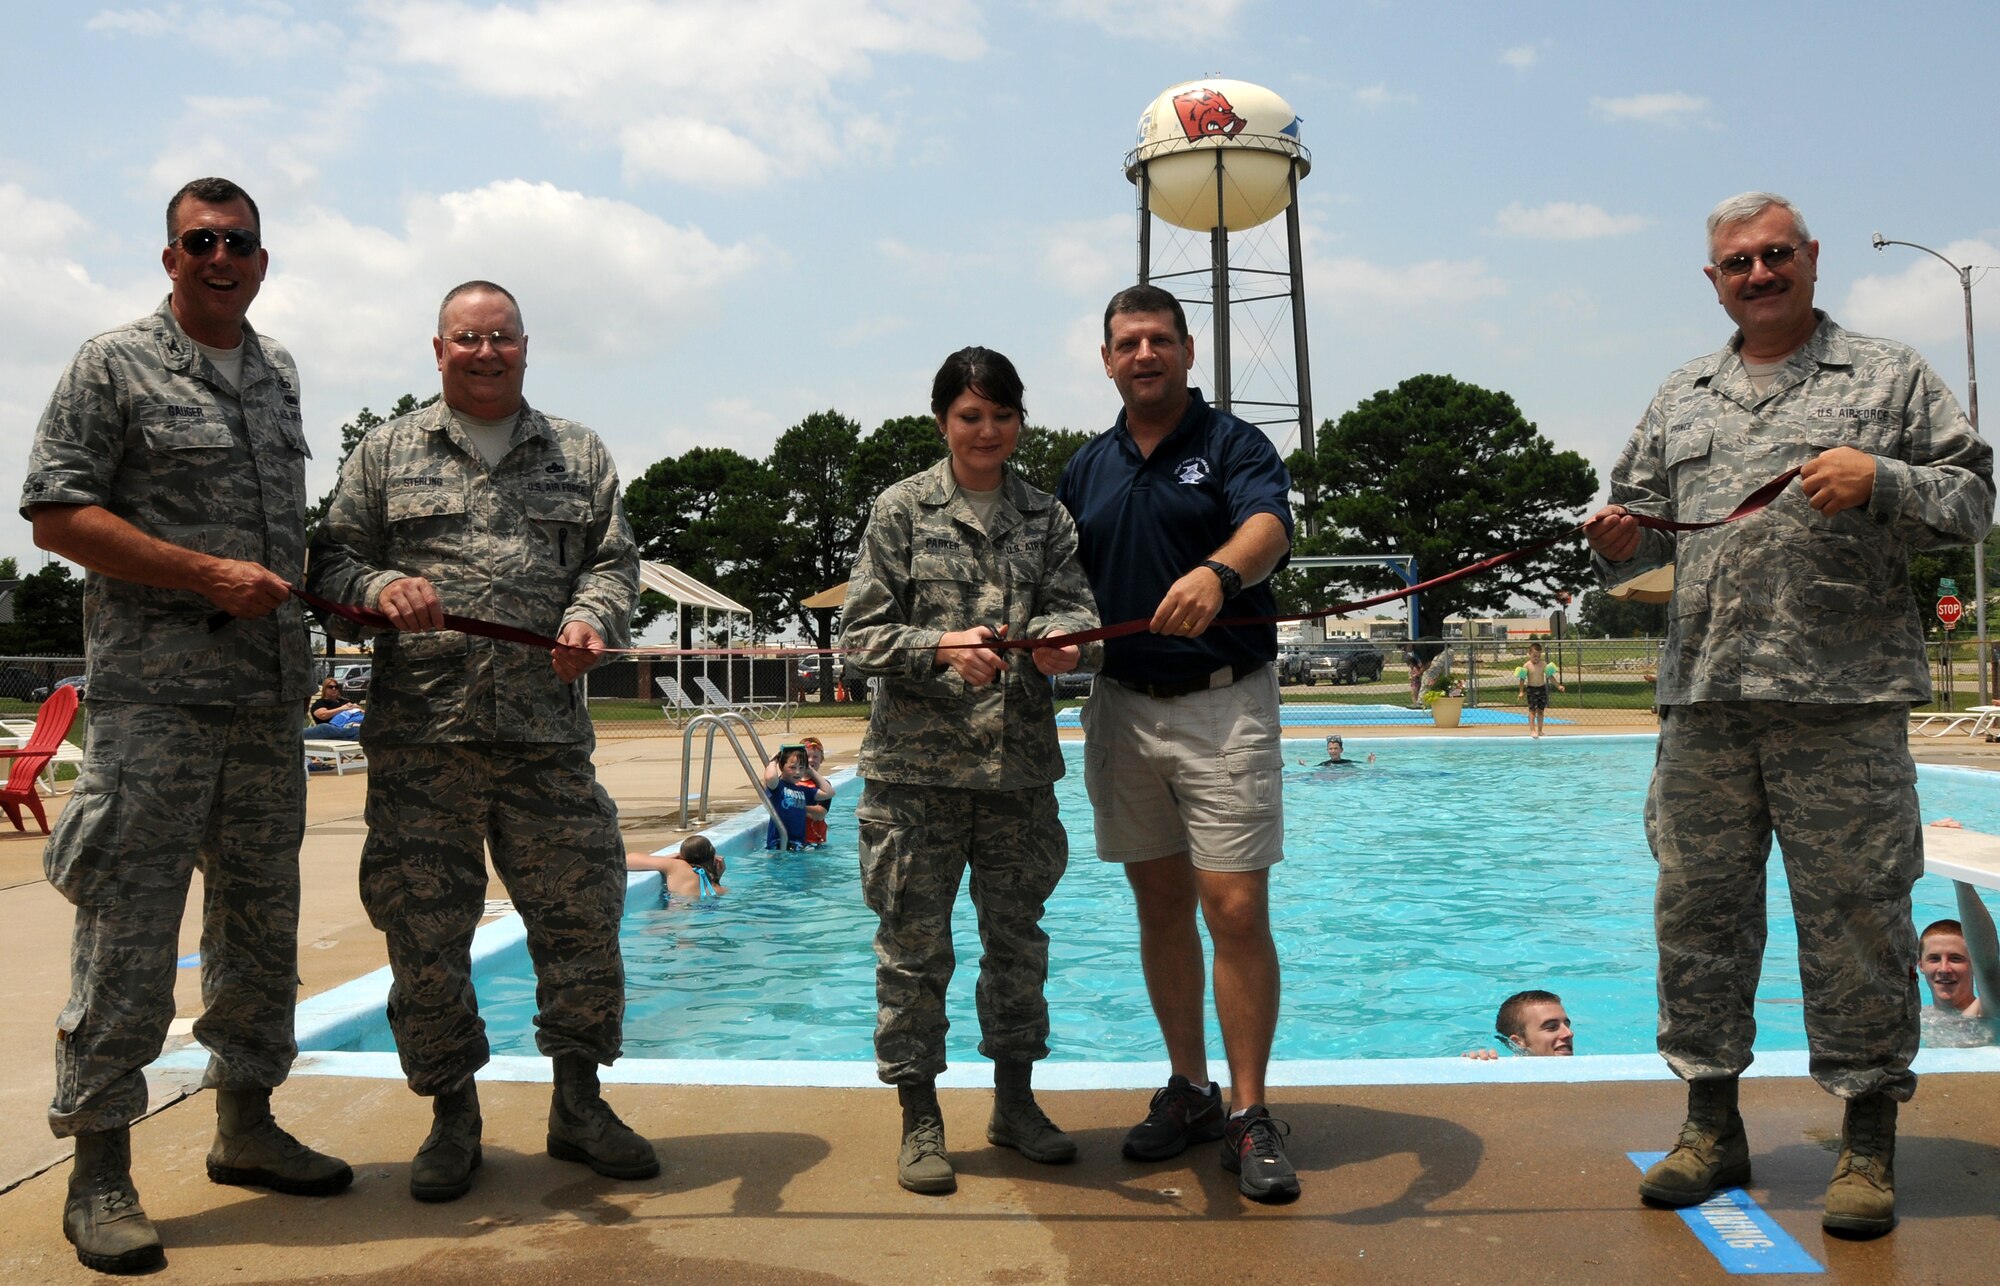 From left to right: Col. Pete Gauger, 188th Fighter Wing vice commander; Chief Master Sgt. Larry  Sterling; Tech Sgt. Rachael Parker; Master Sgt. Mark Allen, base pool committee president; and Senior Master Sgt. Vince Prince conduct a ribbon cutting ceremony at the wing’s base pool June 20. The 188th Fighter Wing’s base swimming pool has been around more than most of its members have been alive. One of the first original construction projects at Ebbing Air National Base in Fort Smith, Ark., the 188th’s base pool had fallen on hard times recently and required more than $25,000 in repairs and upgrades in order to meet the necessary requirements to reopen. Thanks to Master Sgt. Mark Allen, 188th base pool committee president, along with several dedicated, hard-working volunteers, the 188th’s pool is now up and running. The 188th held an official ribbon cutting June 20 to officially open the pool. The ribbon-cutting was followed by a wing luncheon, which fostered camaraderie throughout the unit. (U.S. Air National Guard photo by Senior Airman John Hillier/188th Fighter Wing Public Affairs)